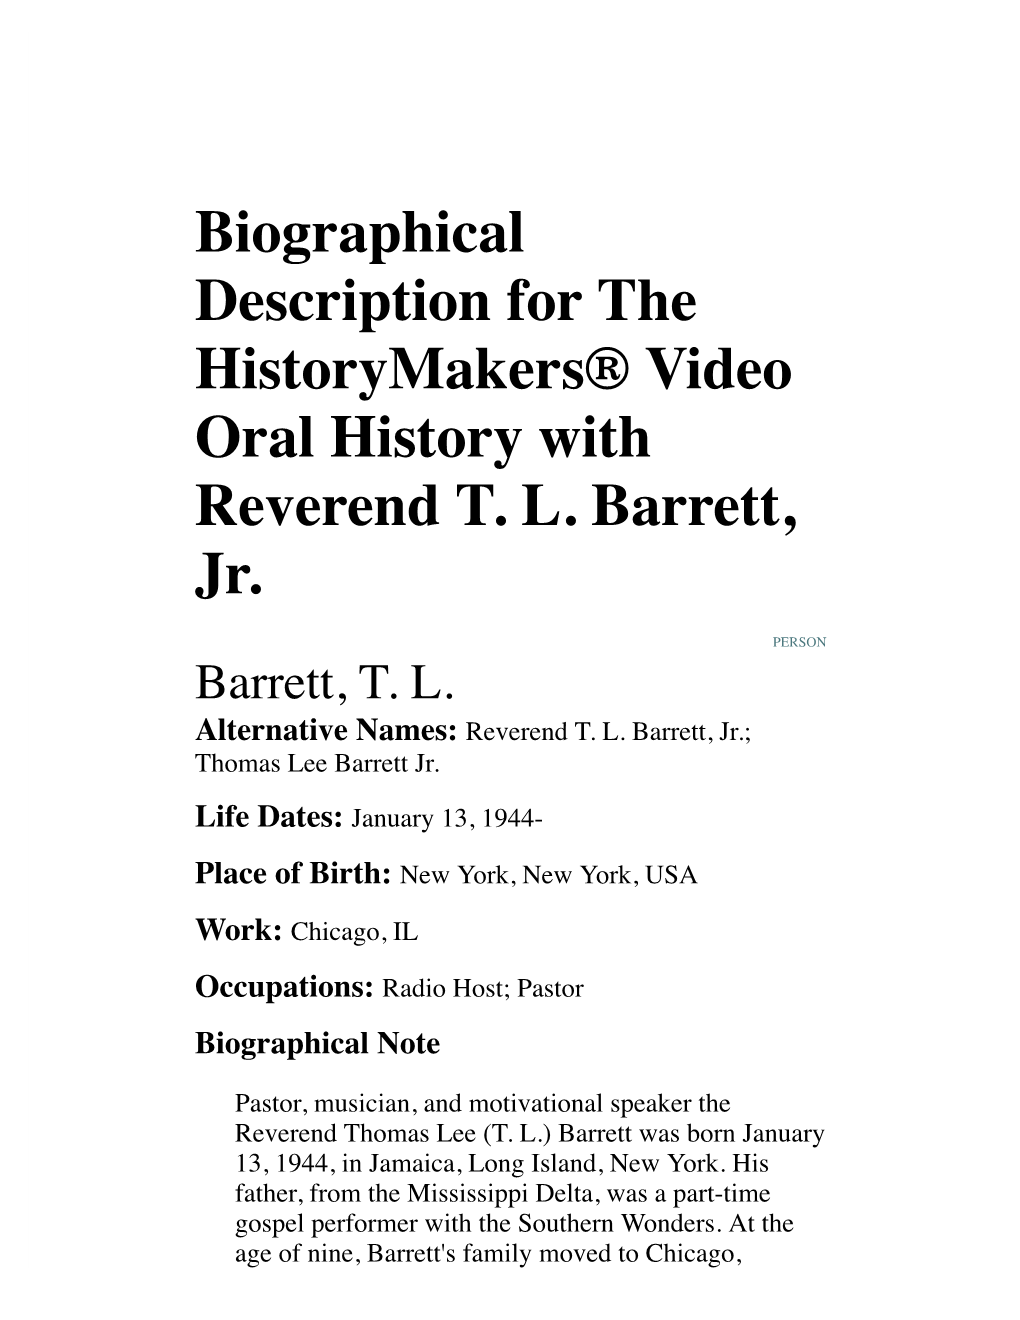 Biographical Description for the Historymakers® Video Oral History with Reverend T